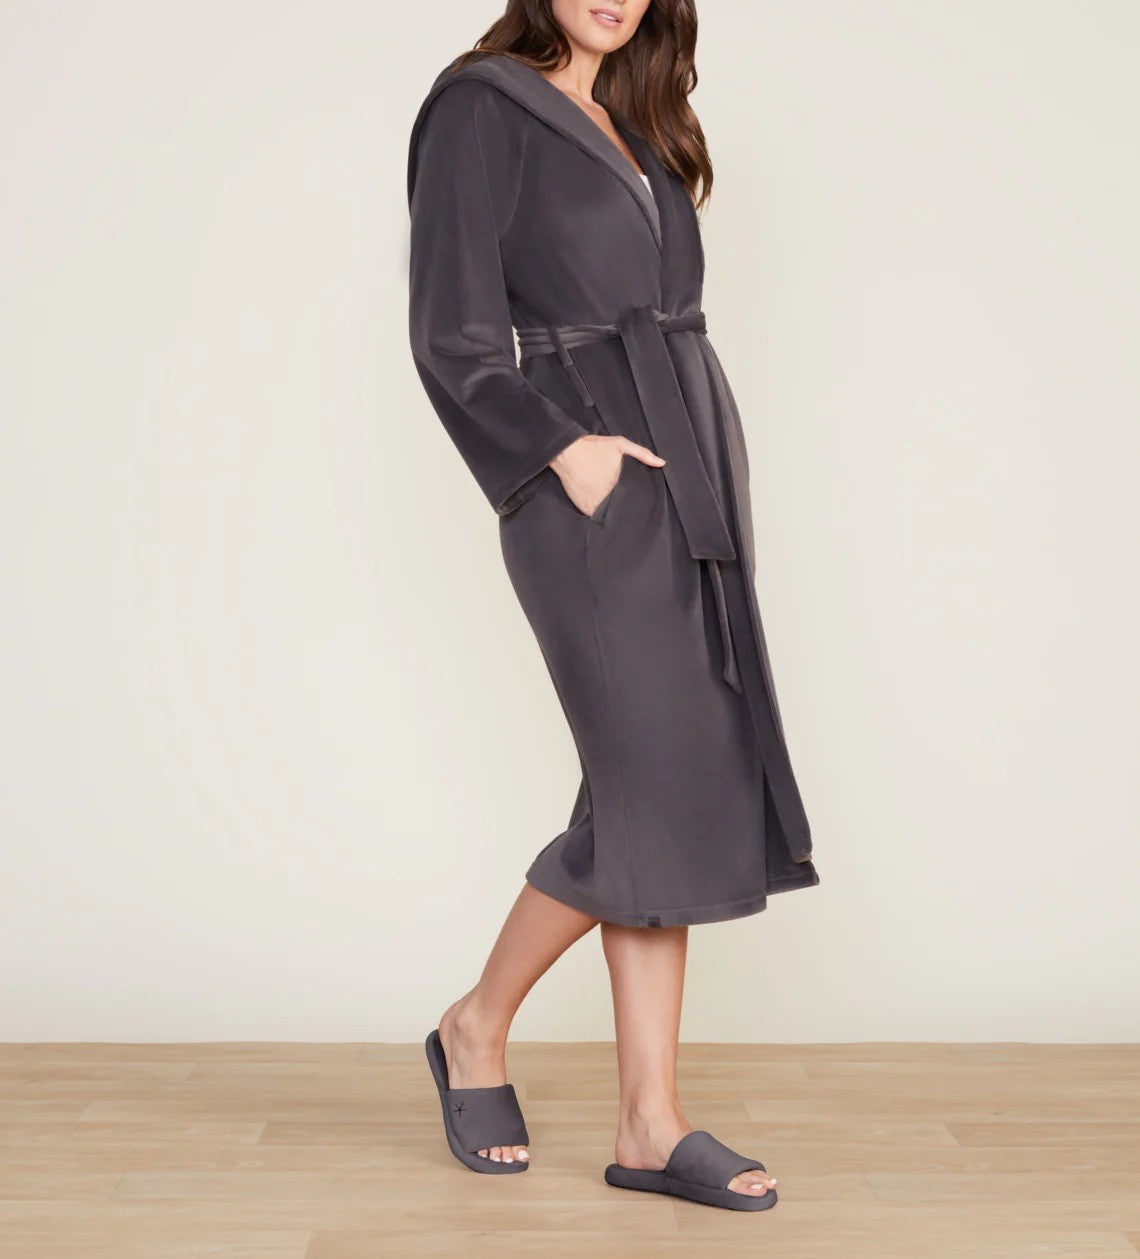 LuxeChic Hooded Robe